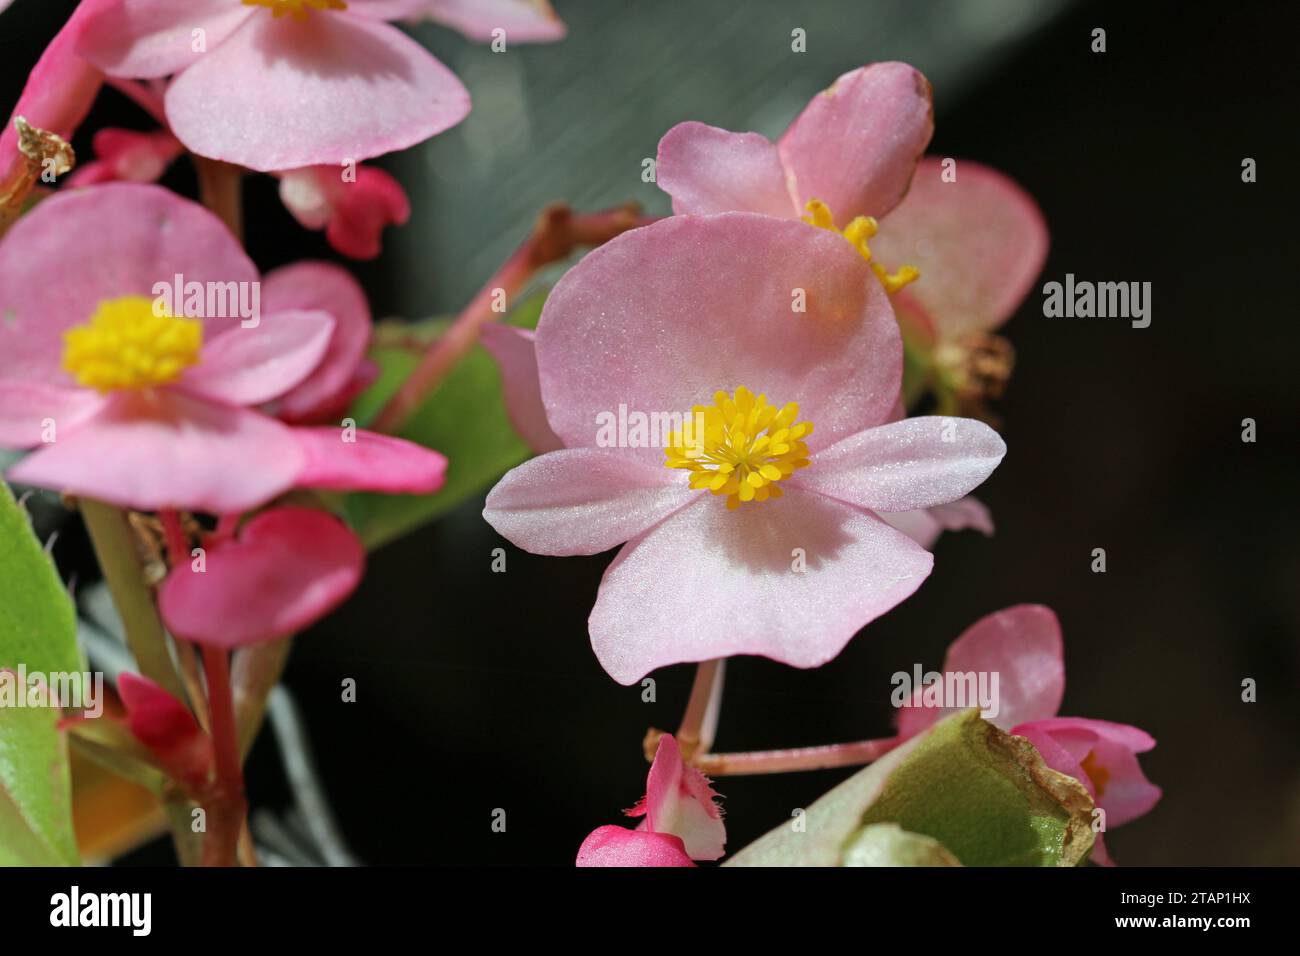 Pink single flowered begonia flowers in close up with a background of blurred leaves. Stock Photo